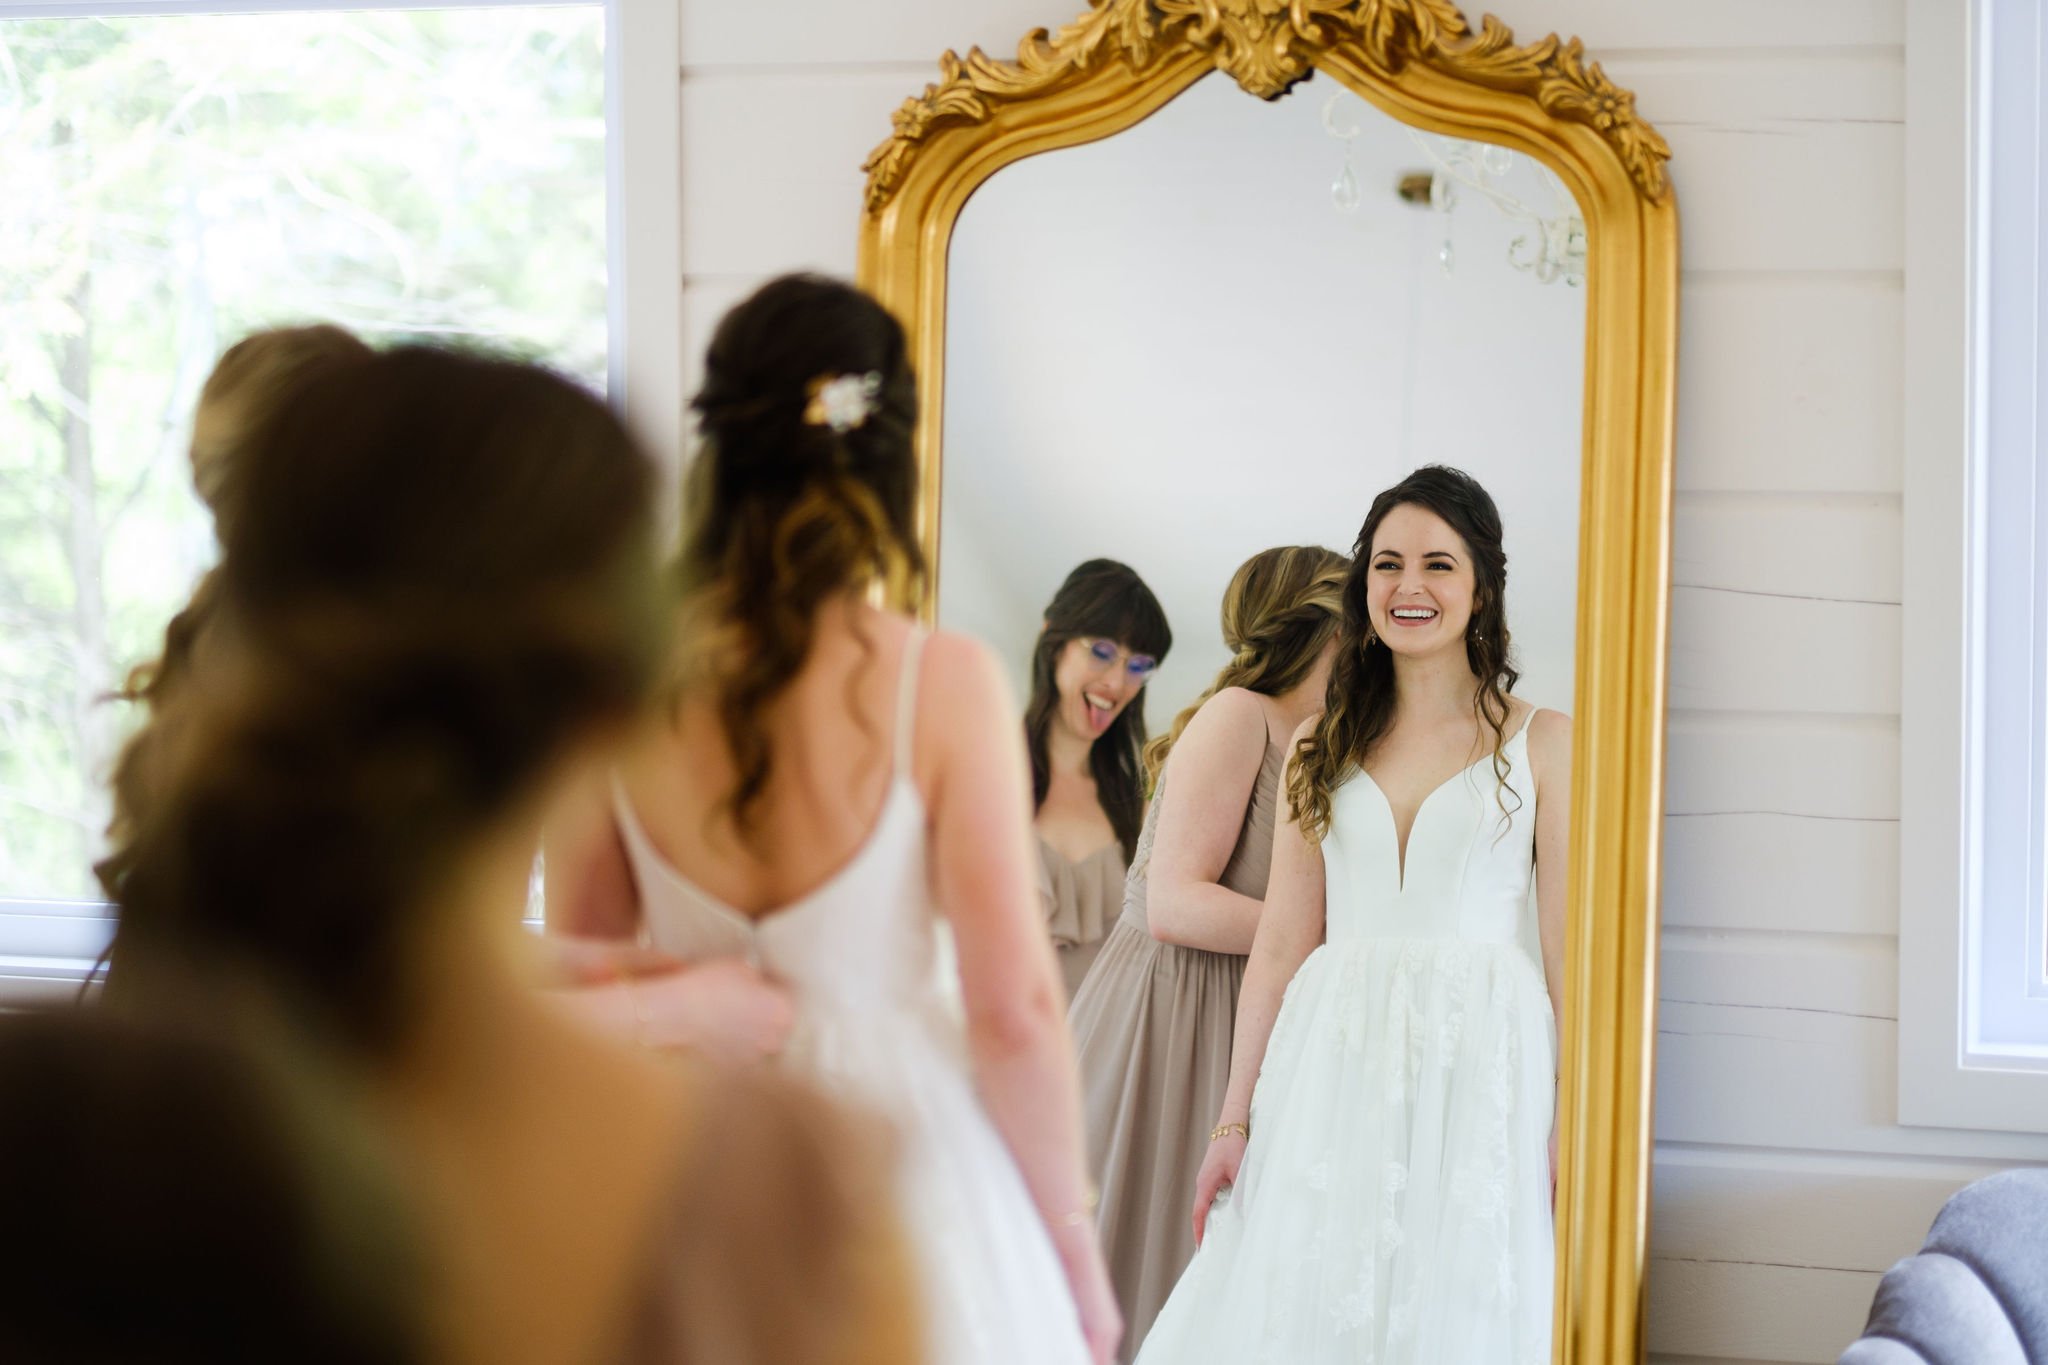  a bride seeing herself in the mirror in her wedding gown 